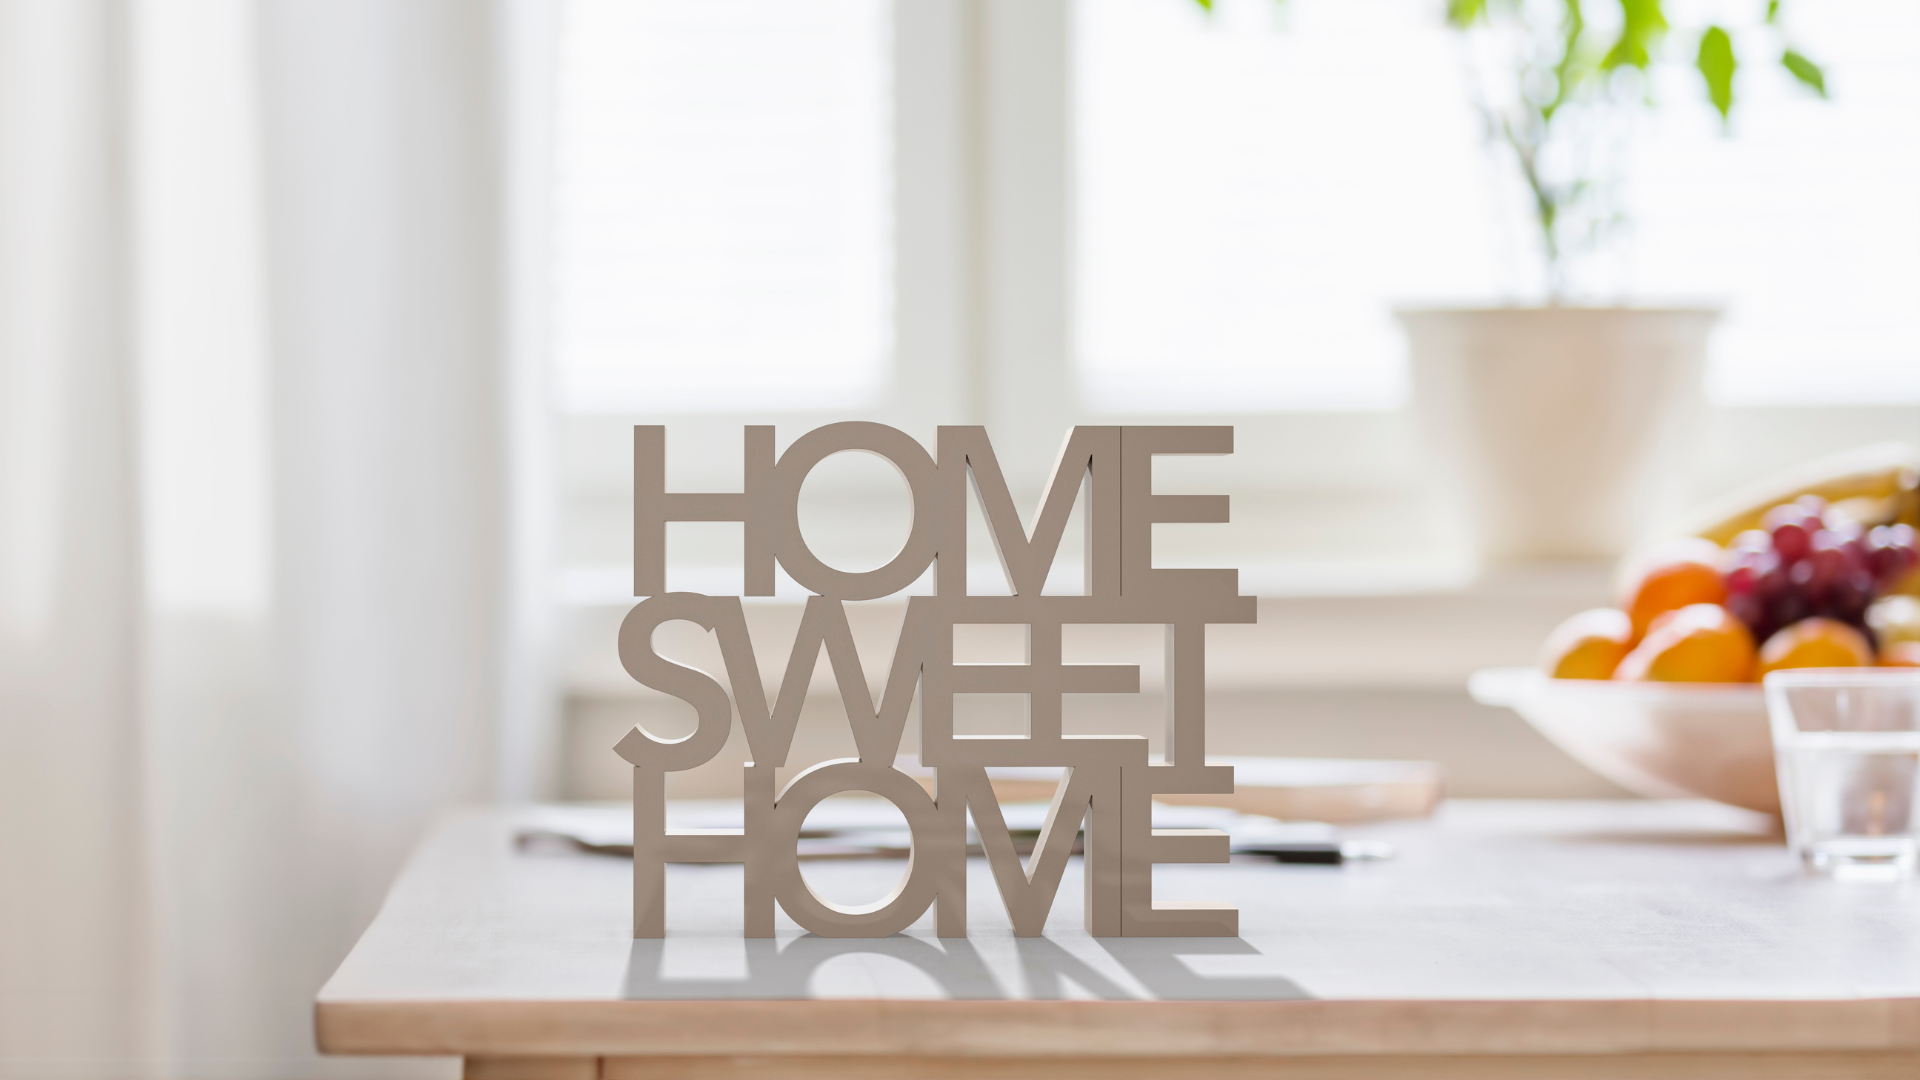 Heavenly Home Sweet Home Home Health Care with Dr. Gail James